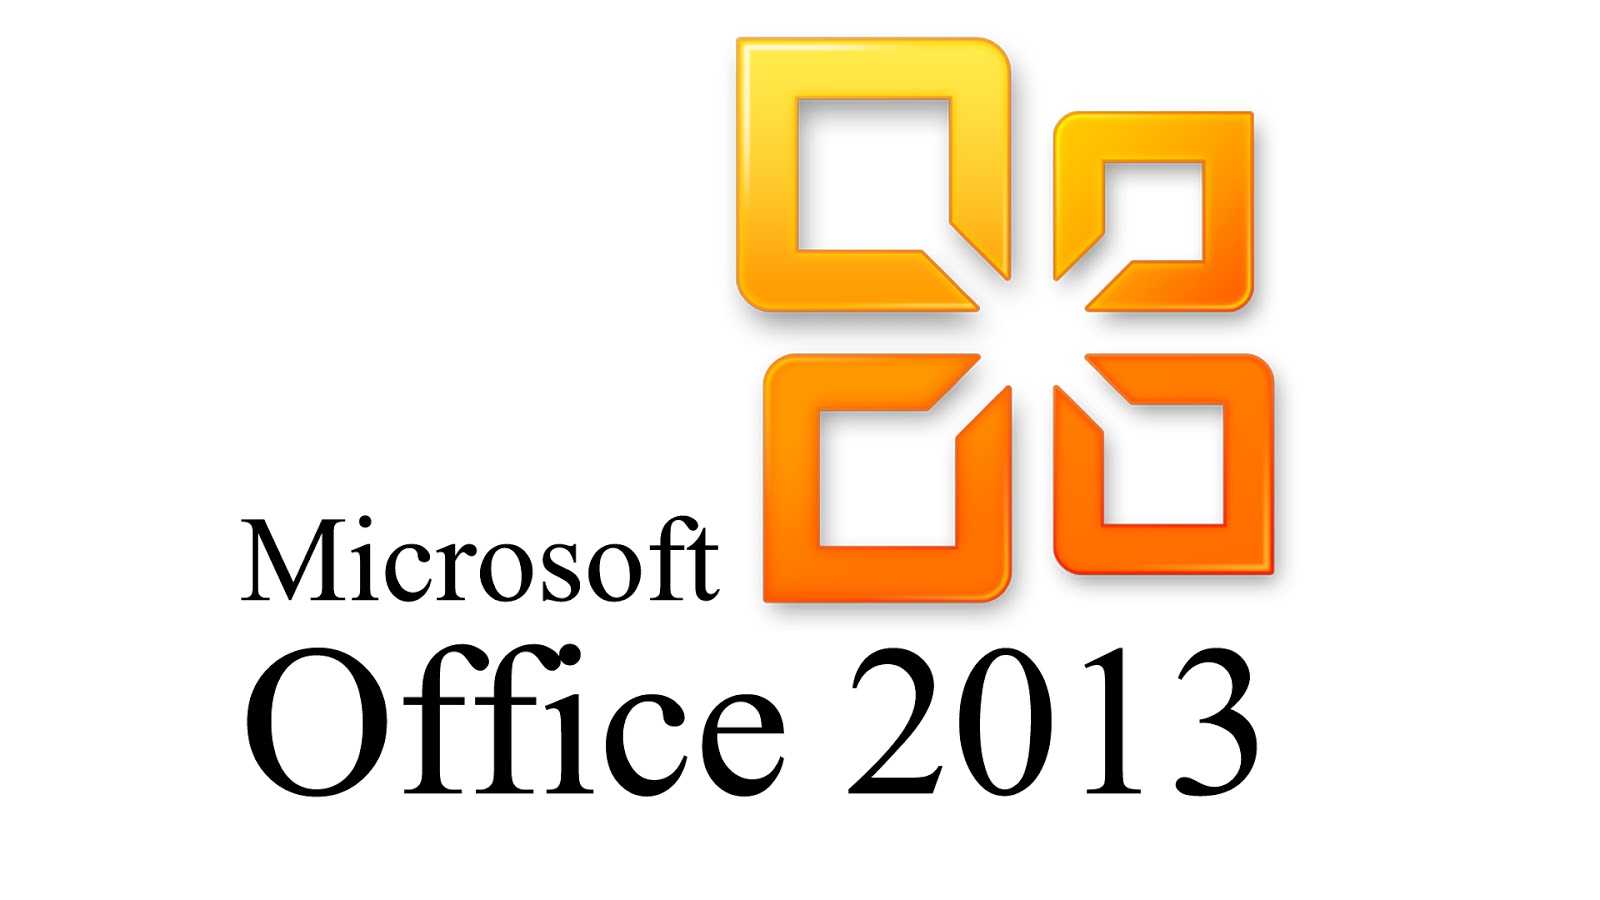 Microsoft Office 2013 Free Download - Microsoft Office, Transparent background PNG HD thumbnail